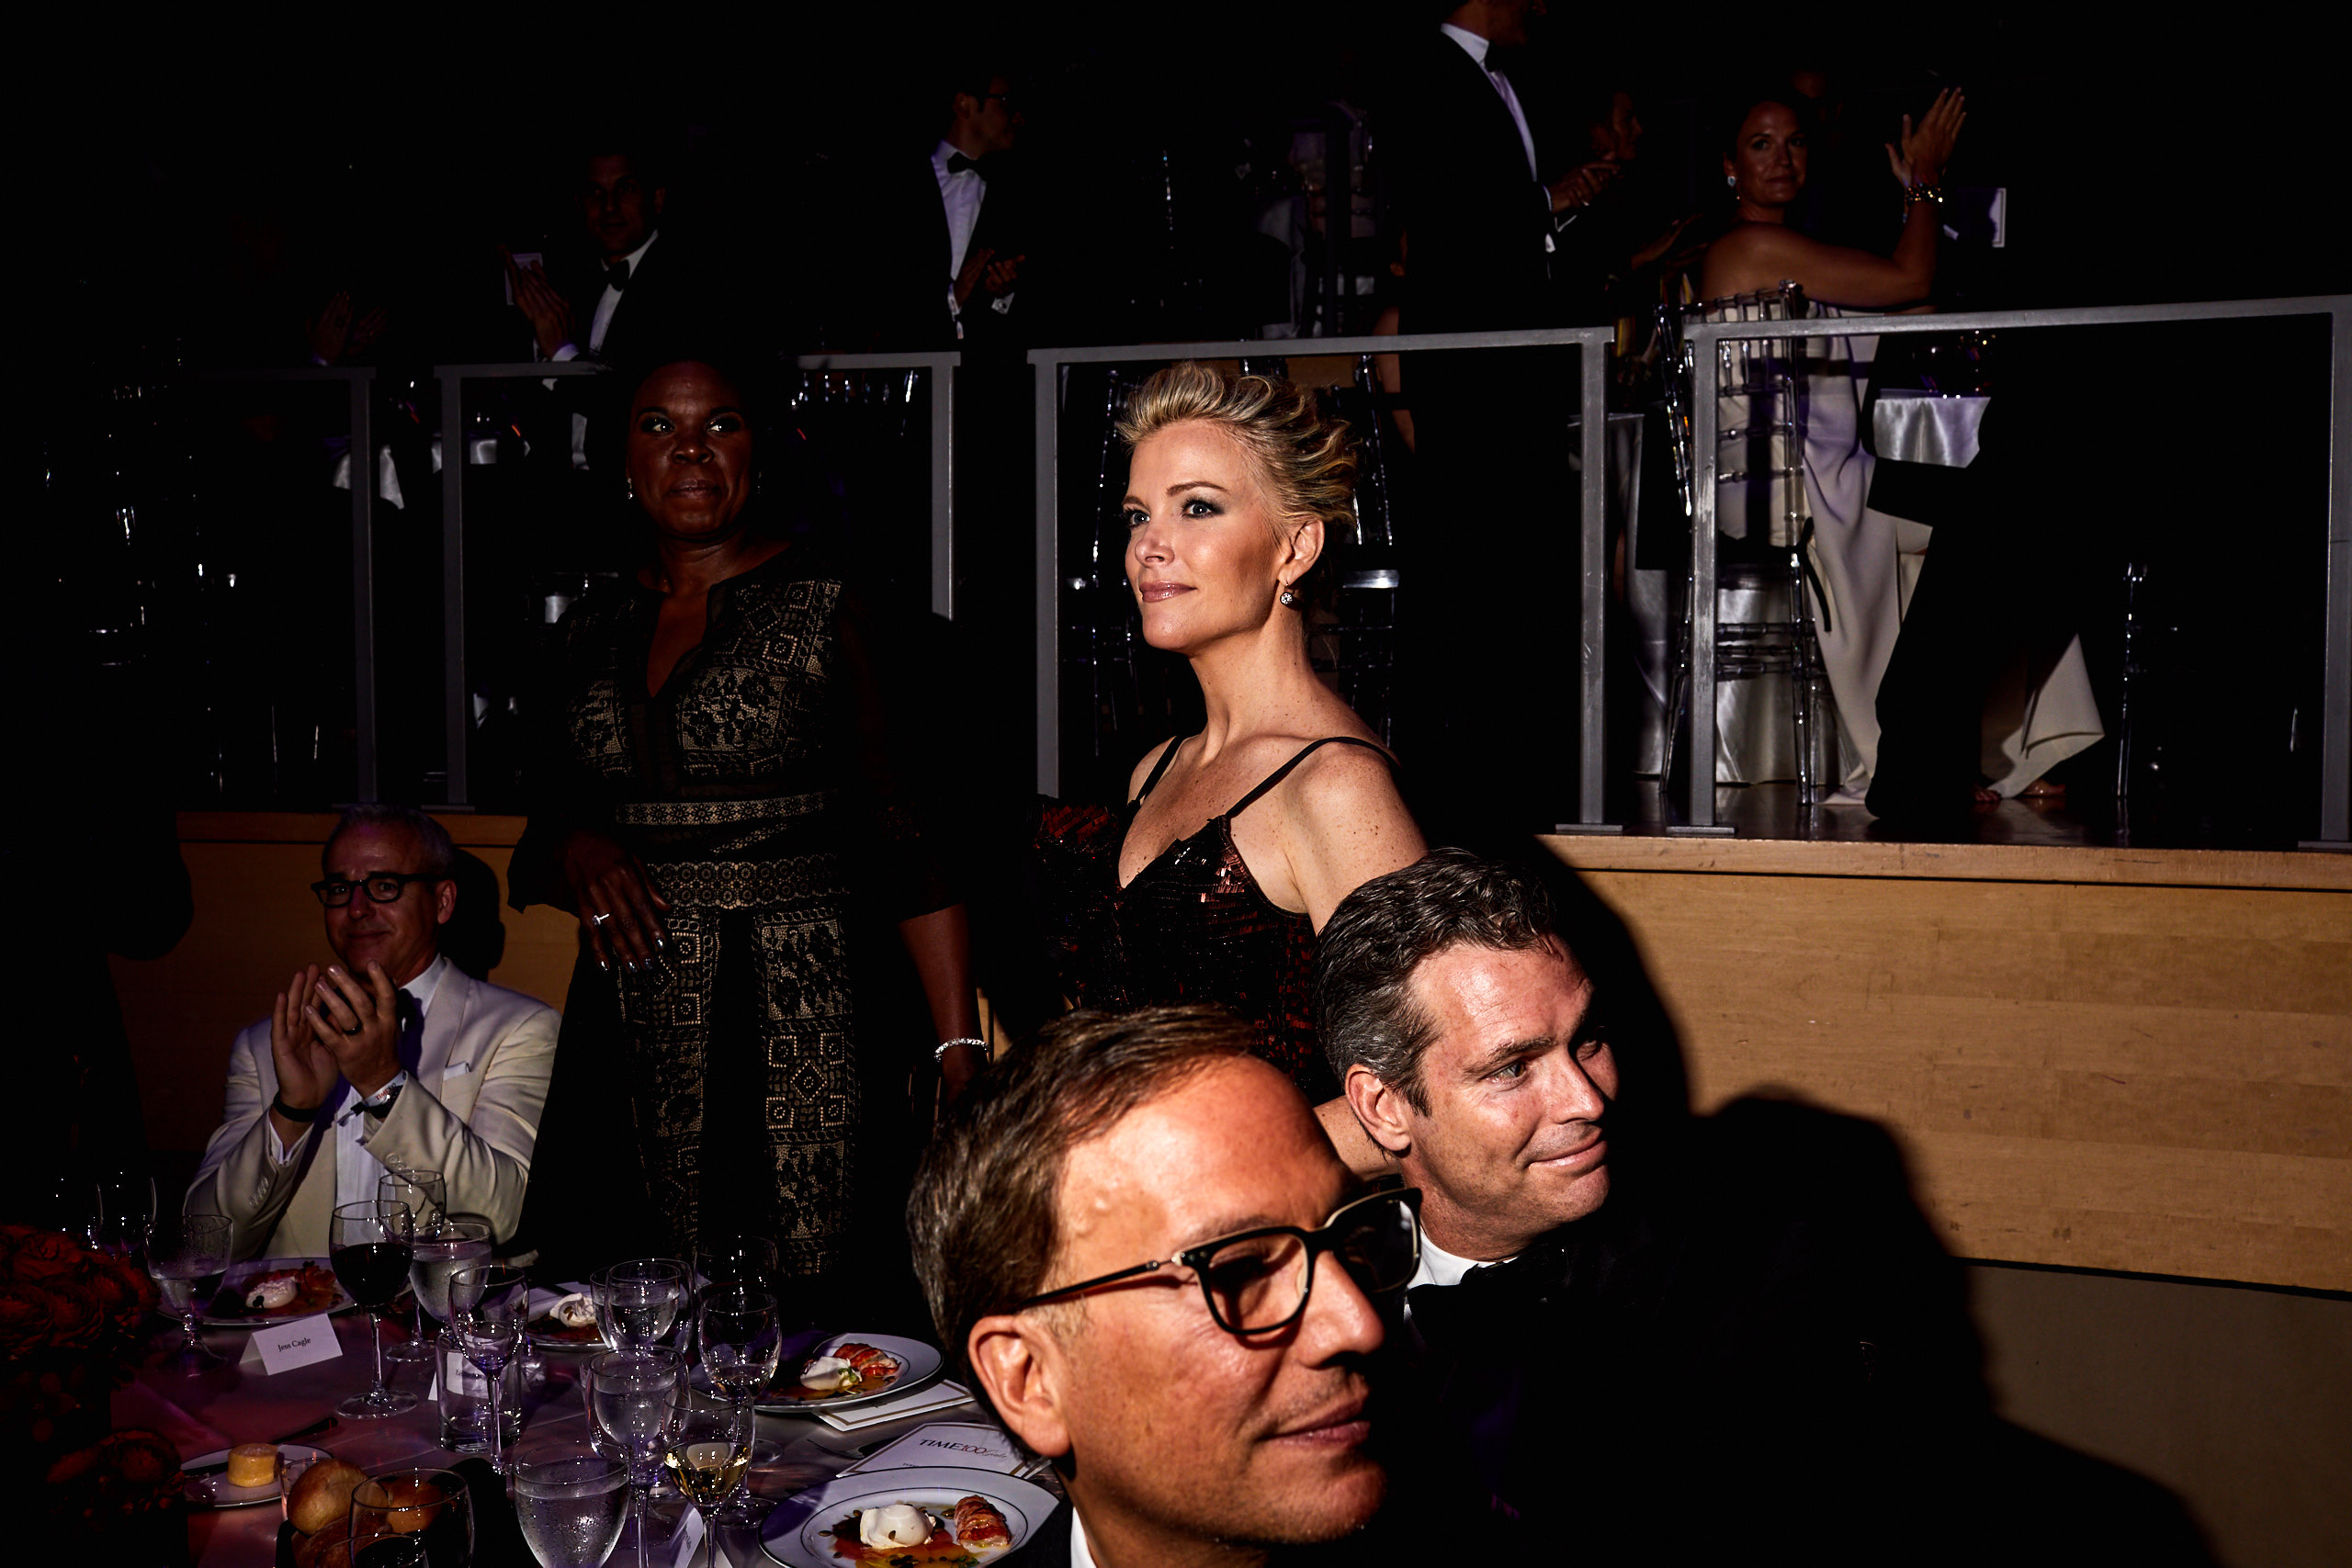 Megyn Kelly at the Time 100 Gala at Jazz at Lincoln Center on April 25, 2017 in New York City.